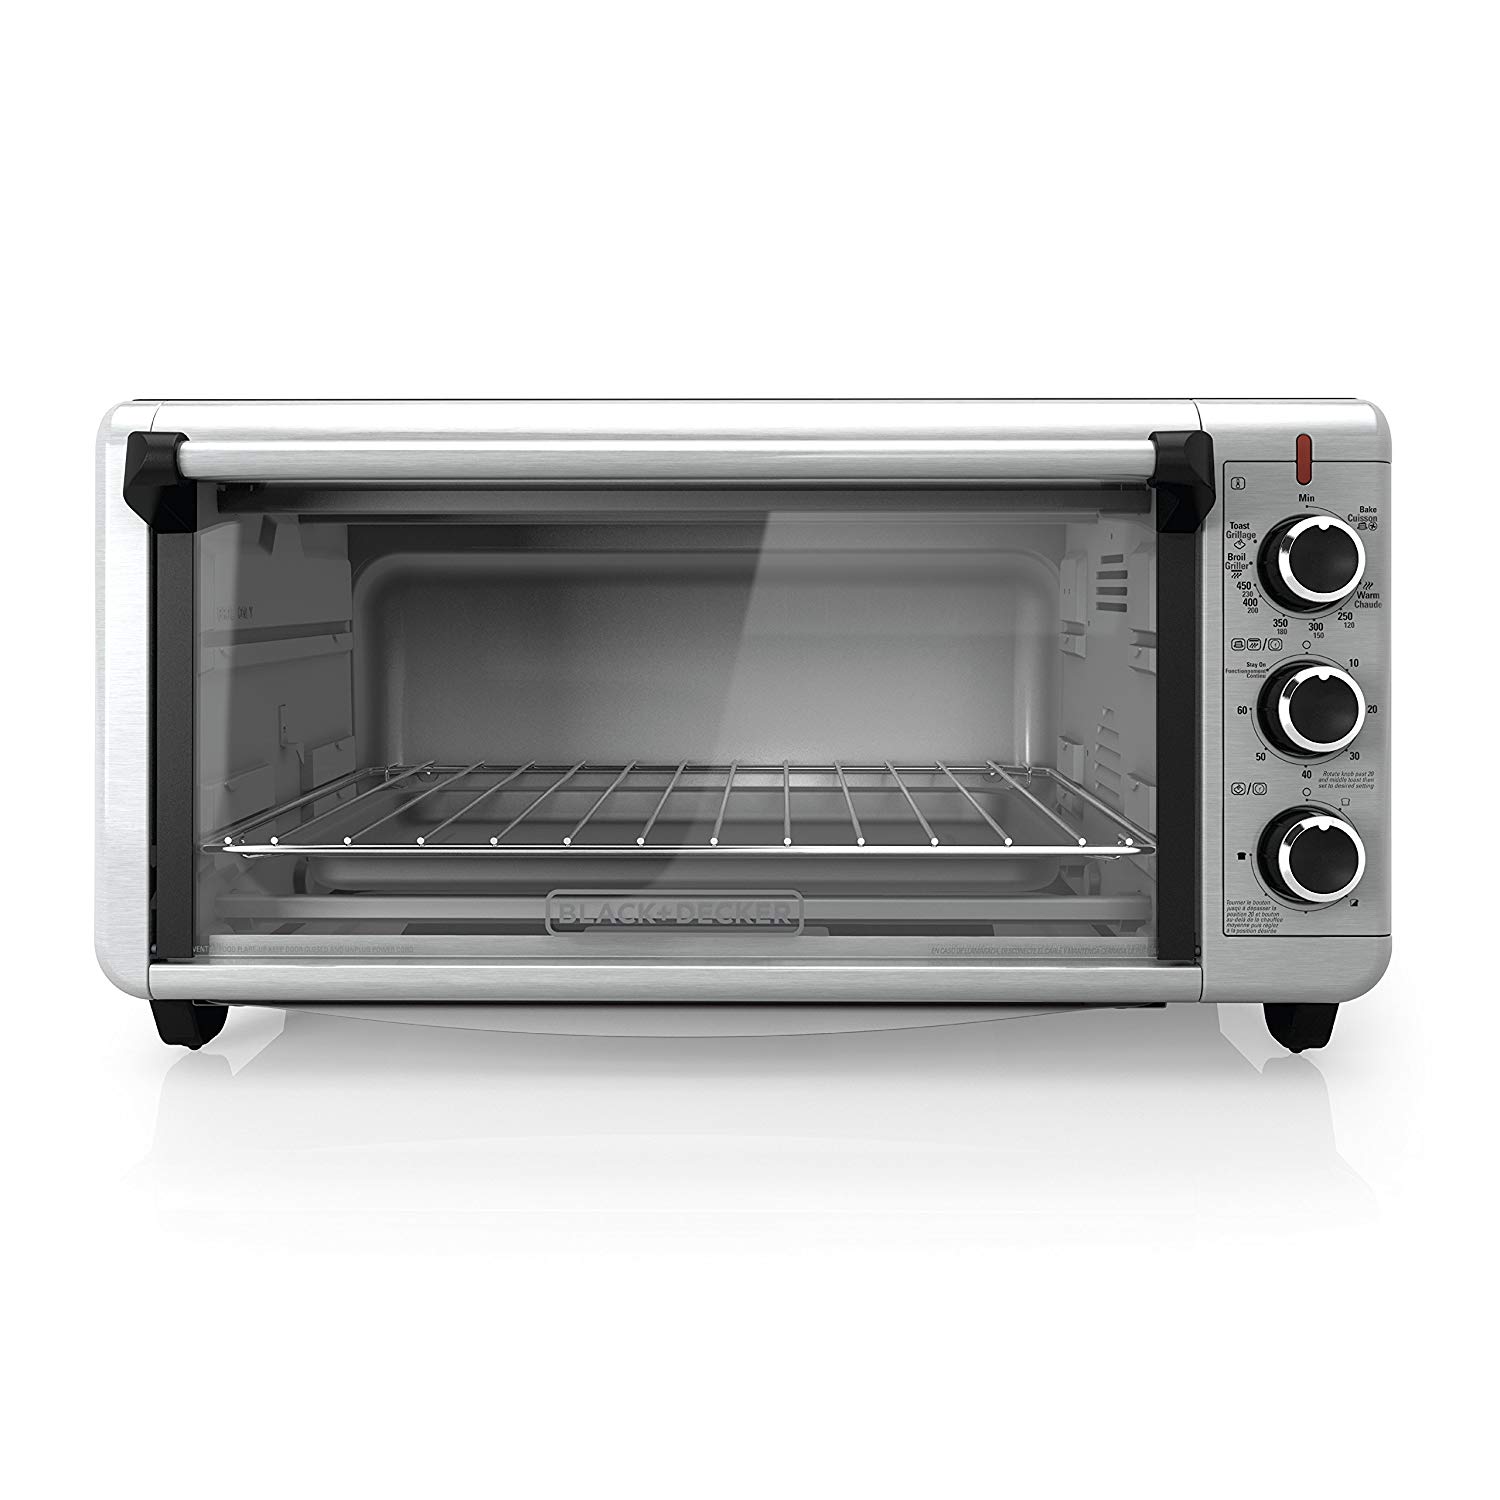 An image of Black and Decker TO3240XSBD Black Stainless Steel Convection Countertop Extra Wide Eight Slice Toaster Oven | Toasty Ovens 